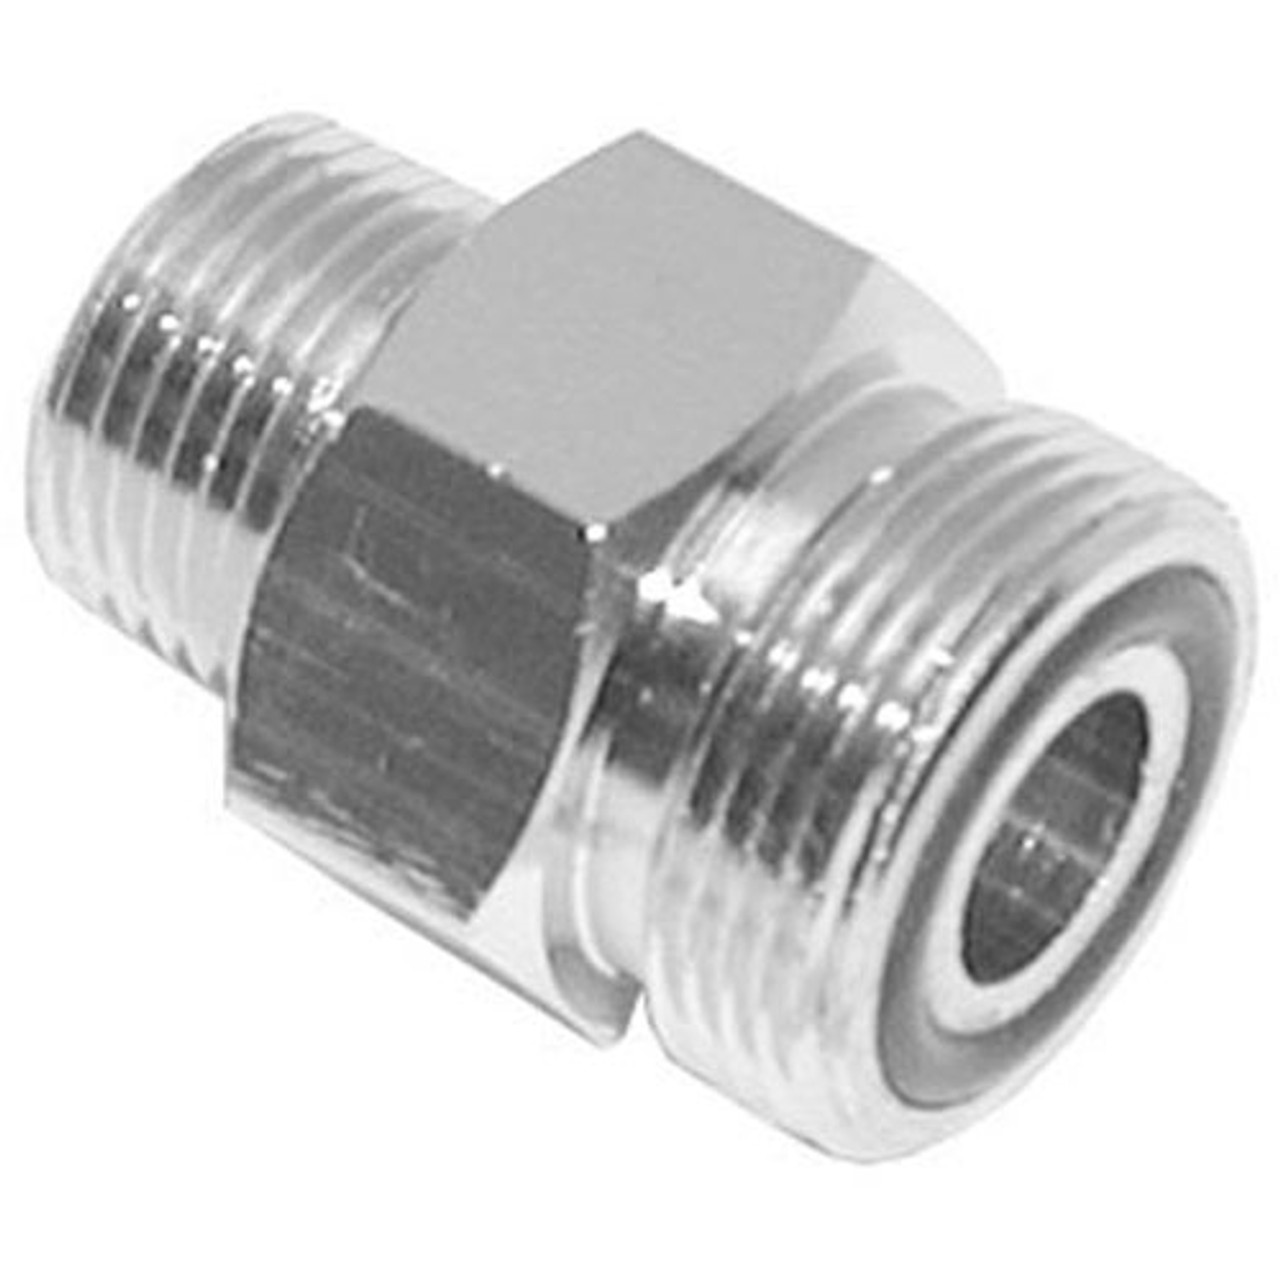 3/4In To 3/8In Adapter For Enc Pre-Rinse Hoses - Replacement Part For AllPoints 266350